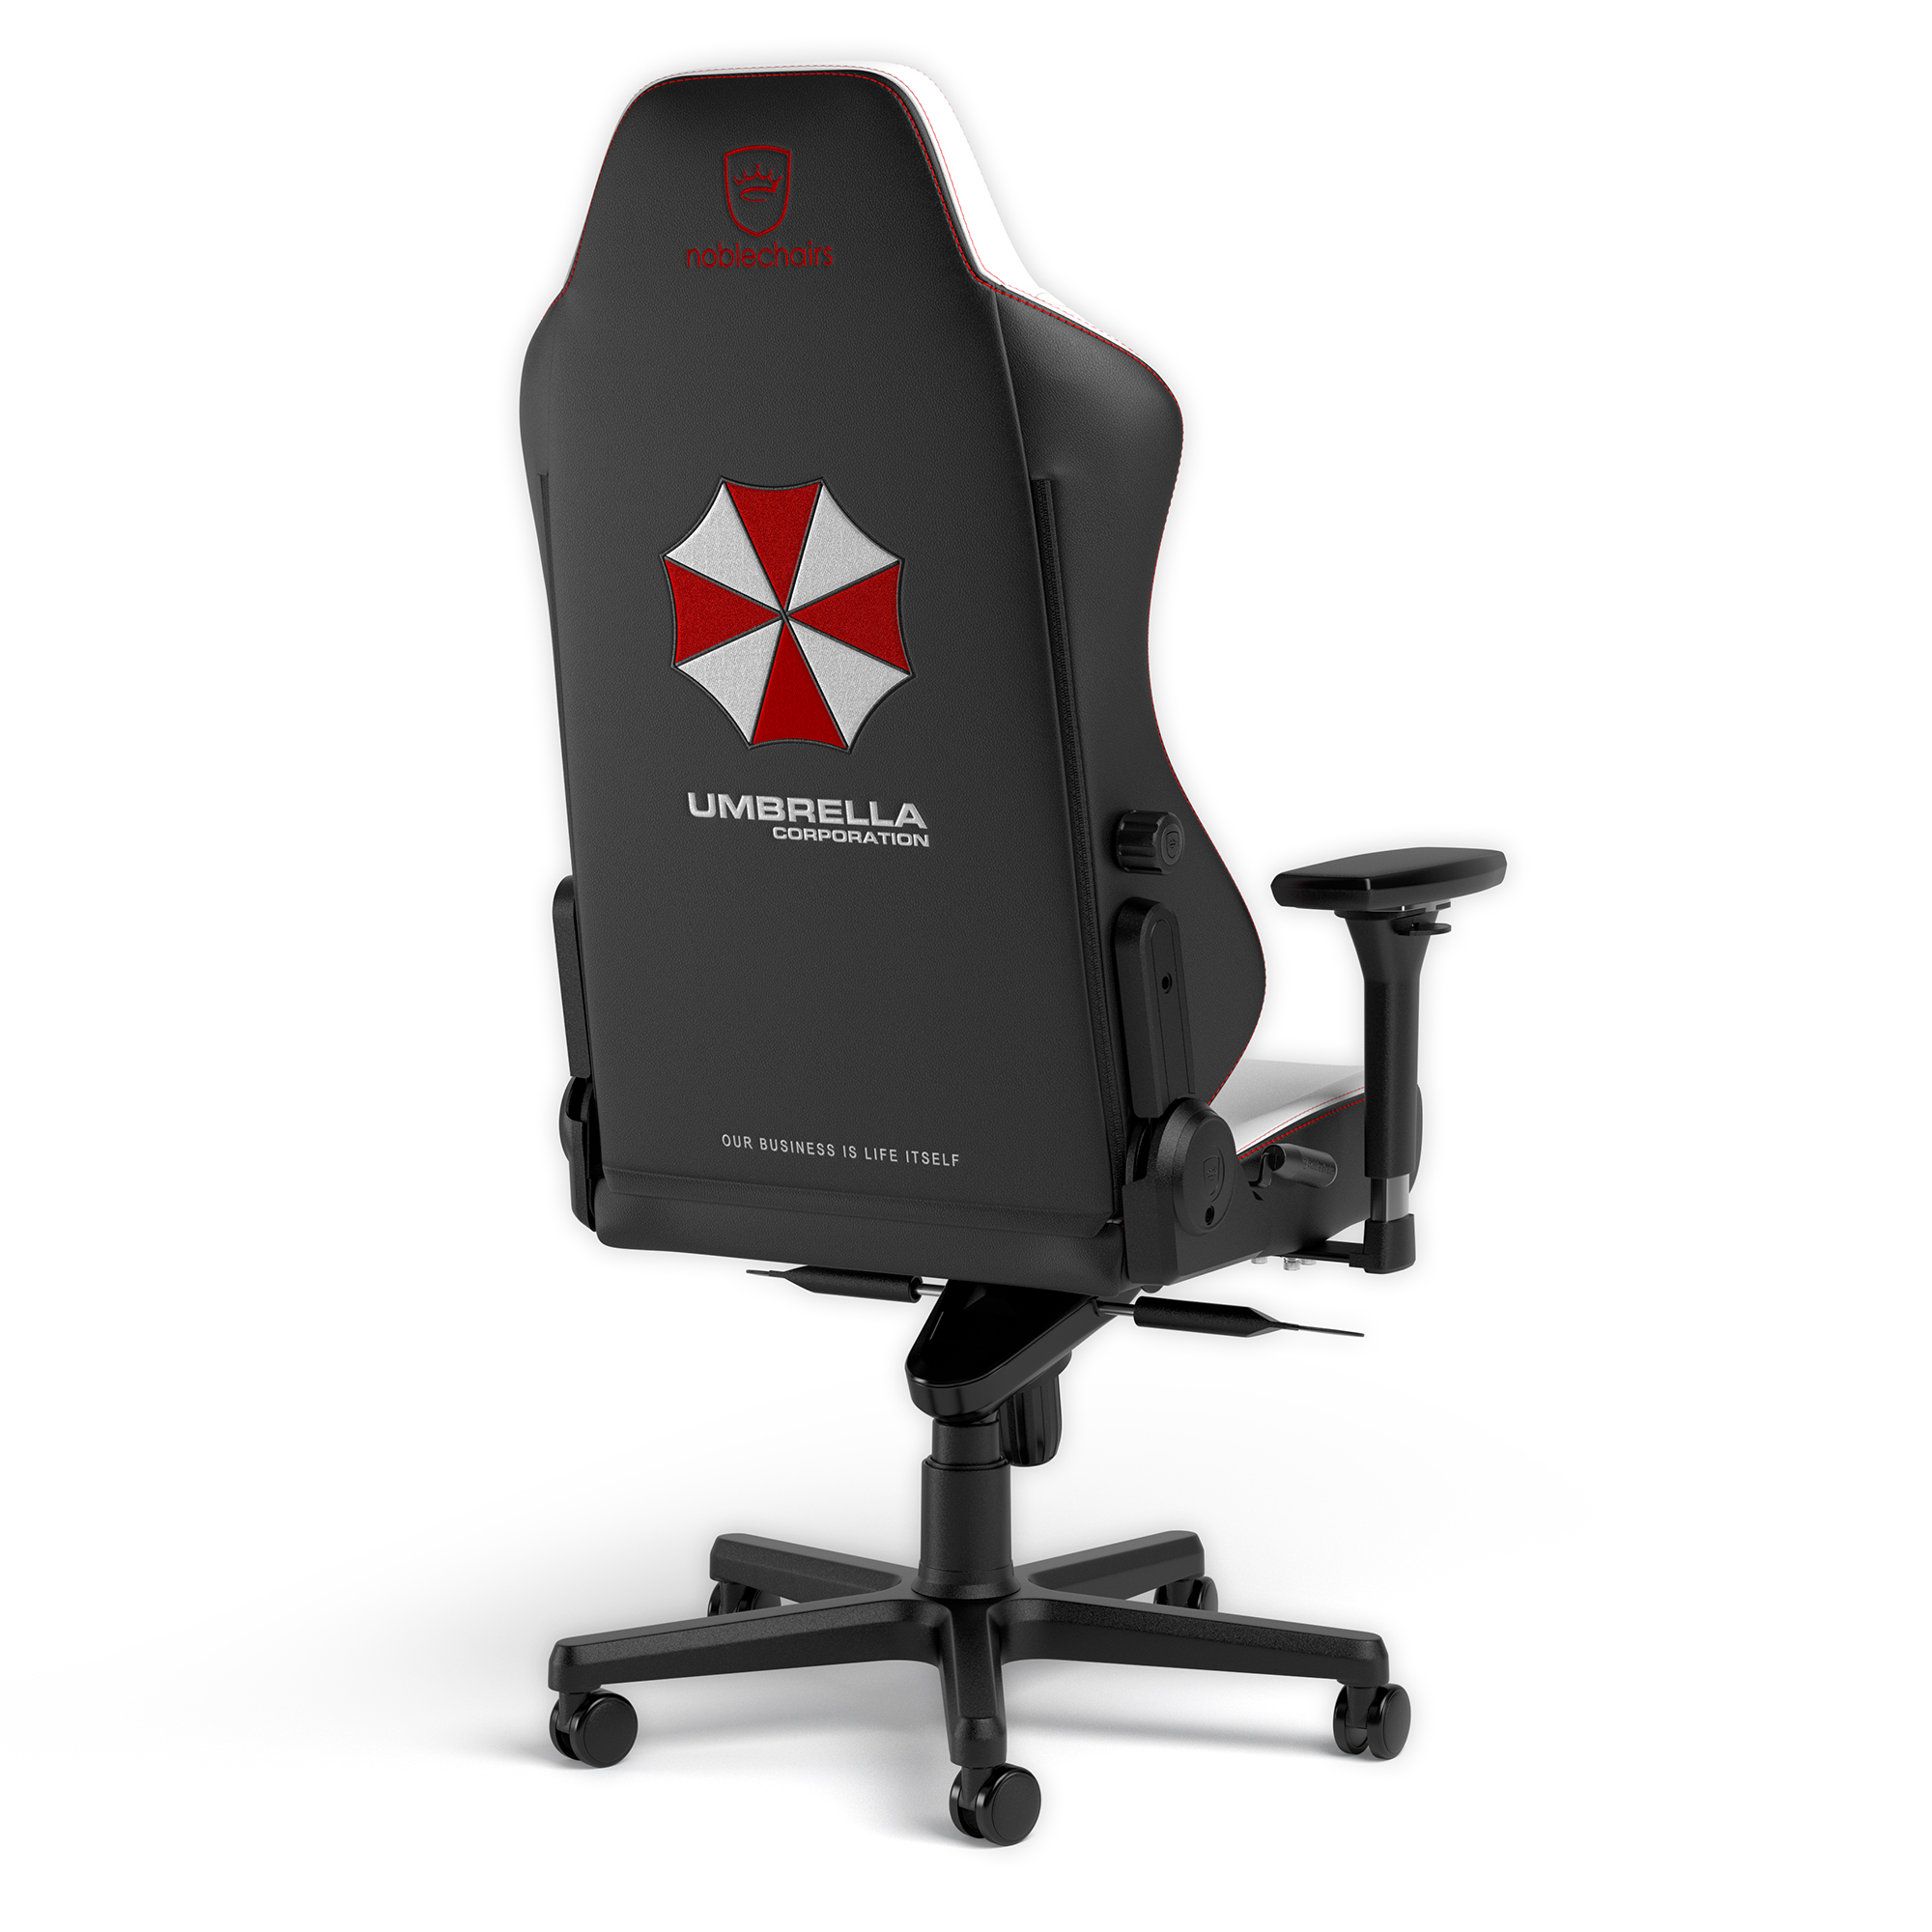 noblechairs - noblechairs HERO Gaming Chair Resident Evil Umbrella Edition 